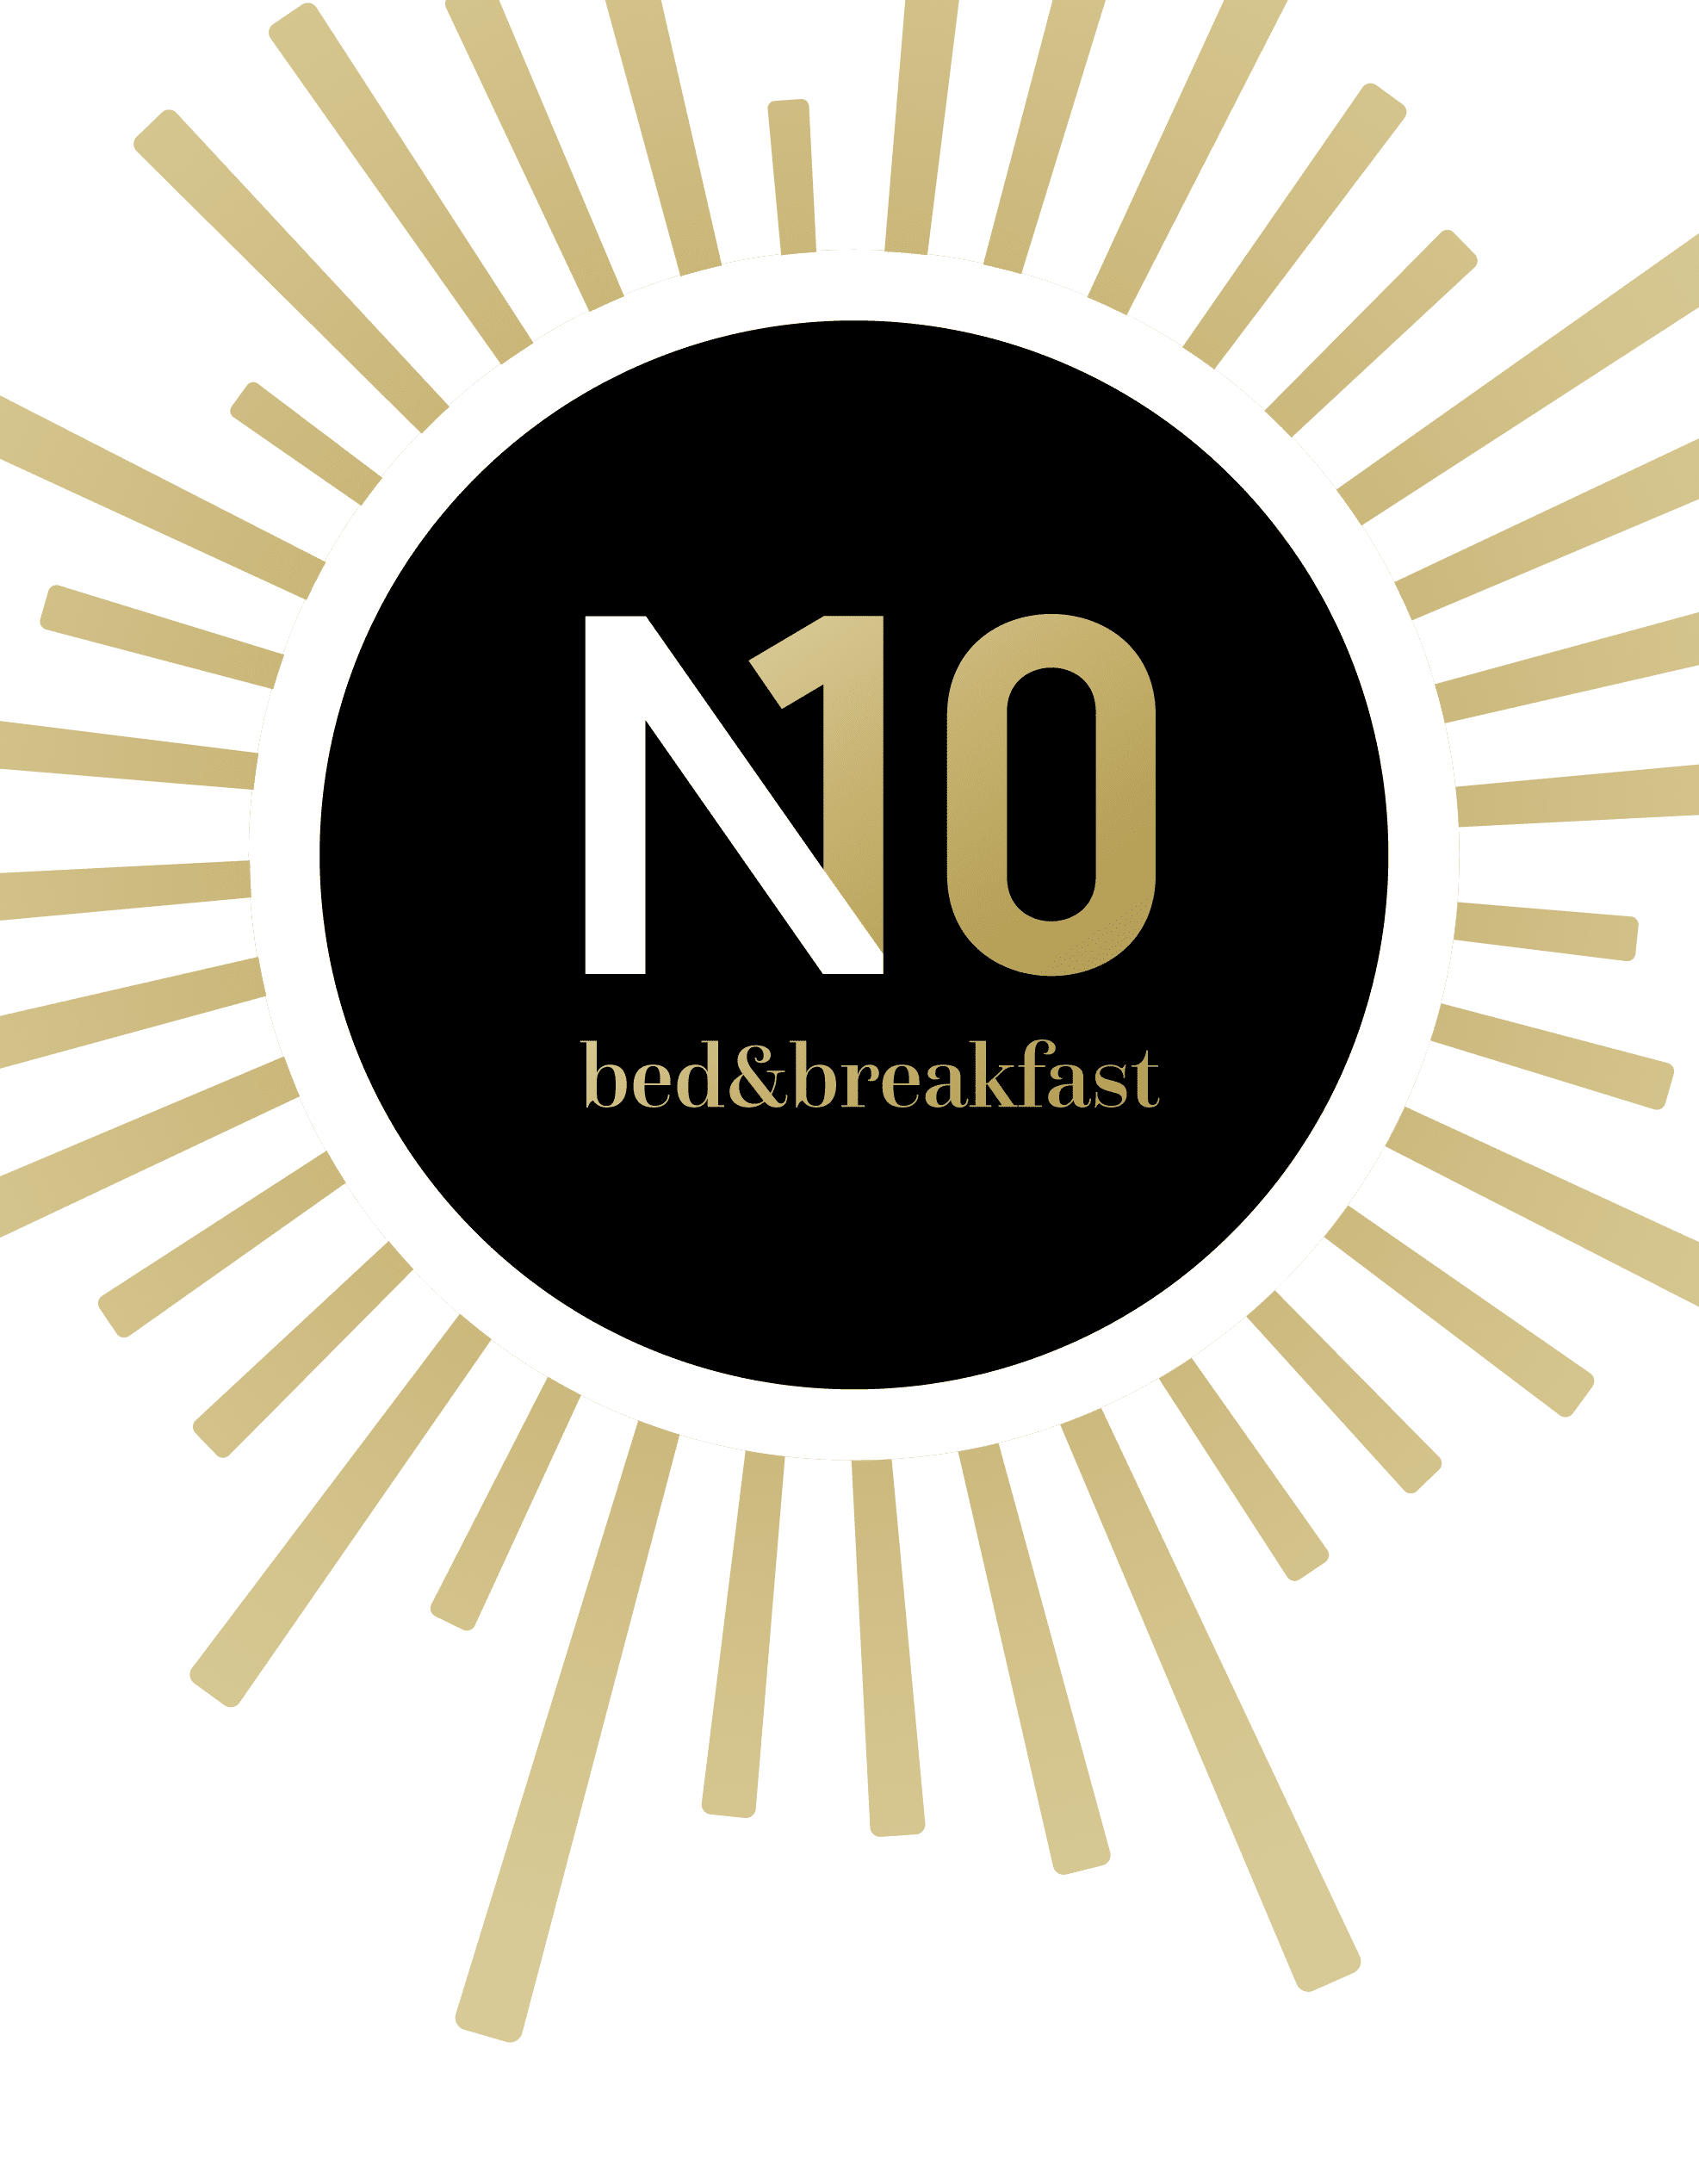 n10 bed and breakfast Logo